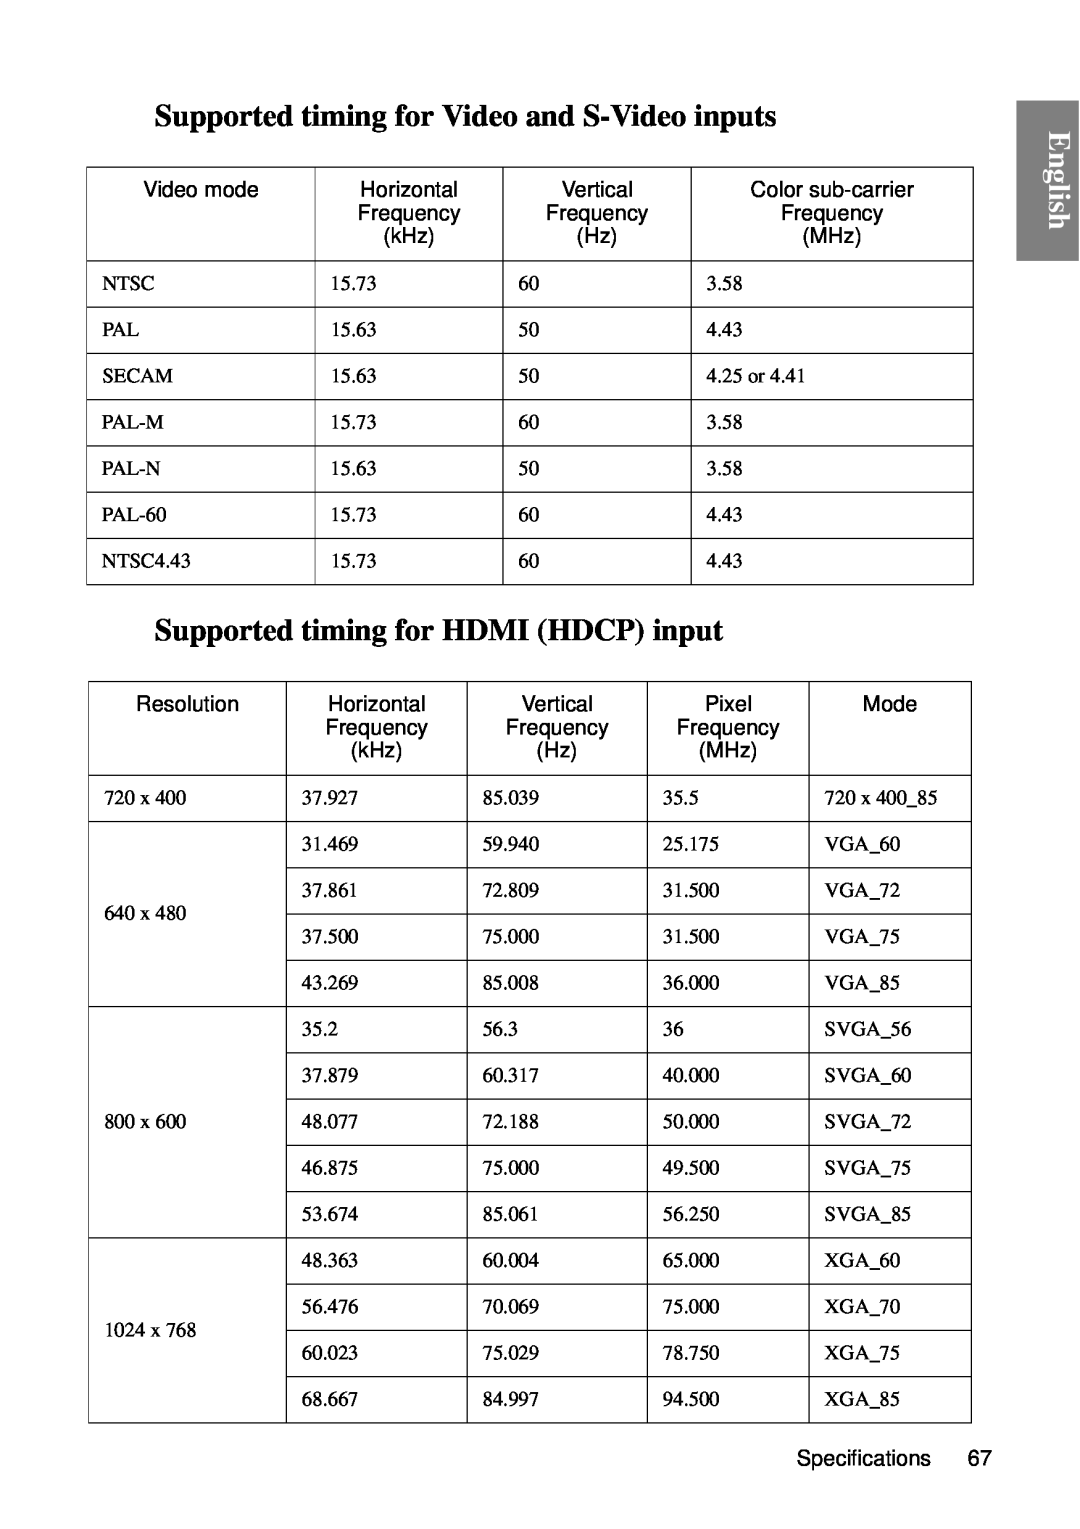 BenQ SP840 user manual Supported timing for Video and S-Video inputs, Supported timing for HDMI HDCP input, English 